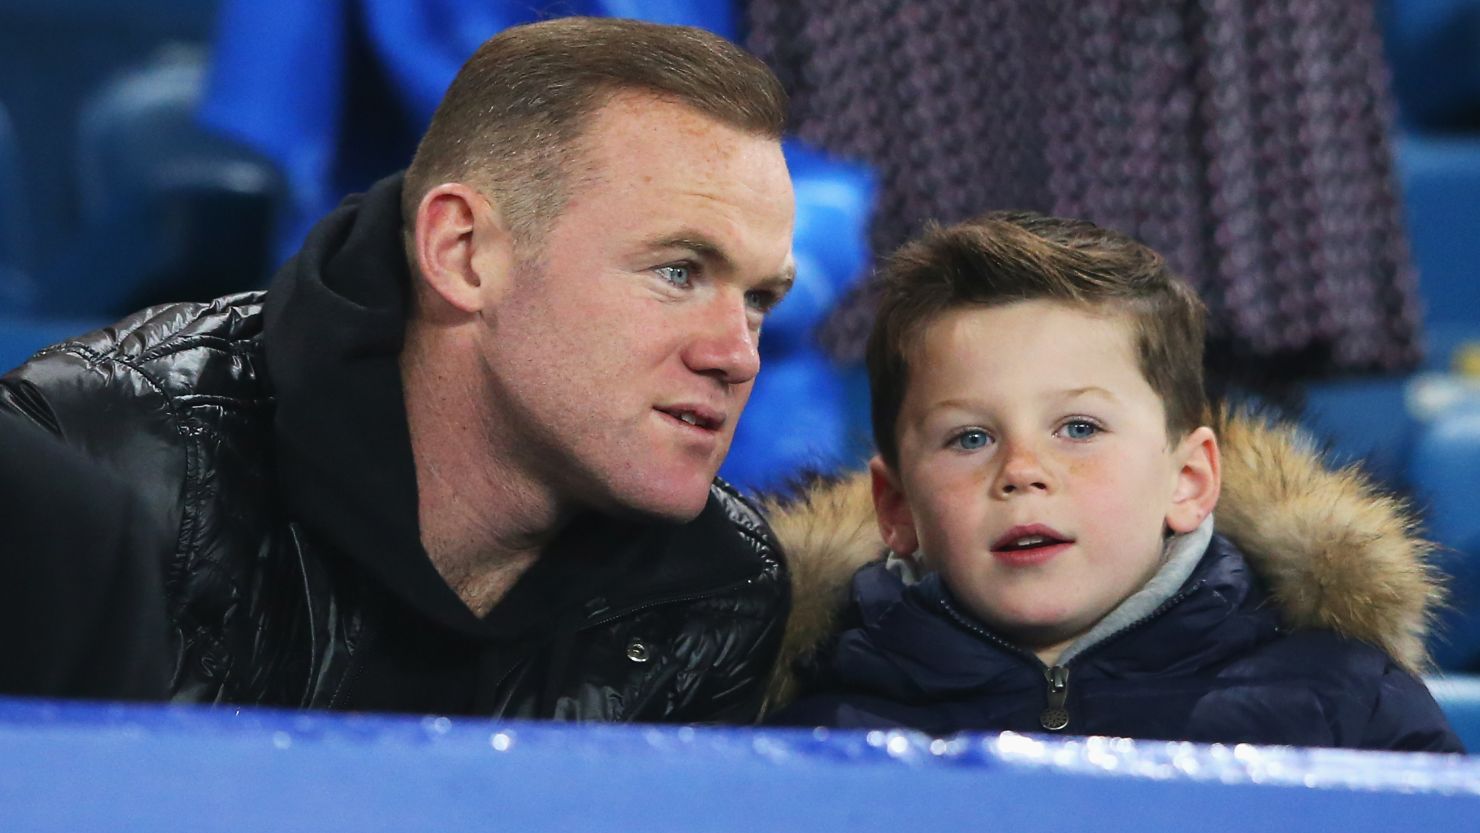 Wayne Rooney's son Kai has signed for Manchester United.